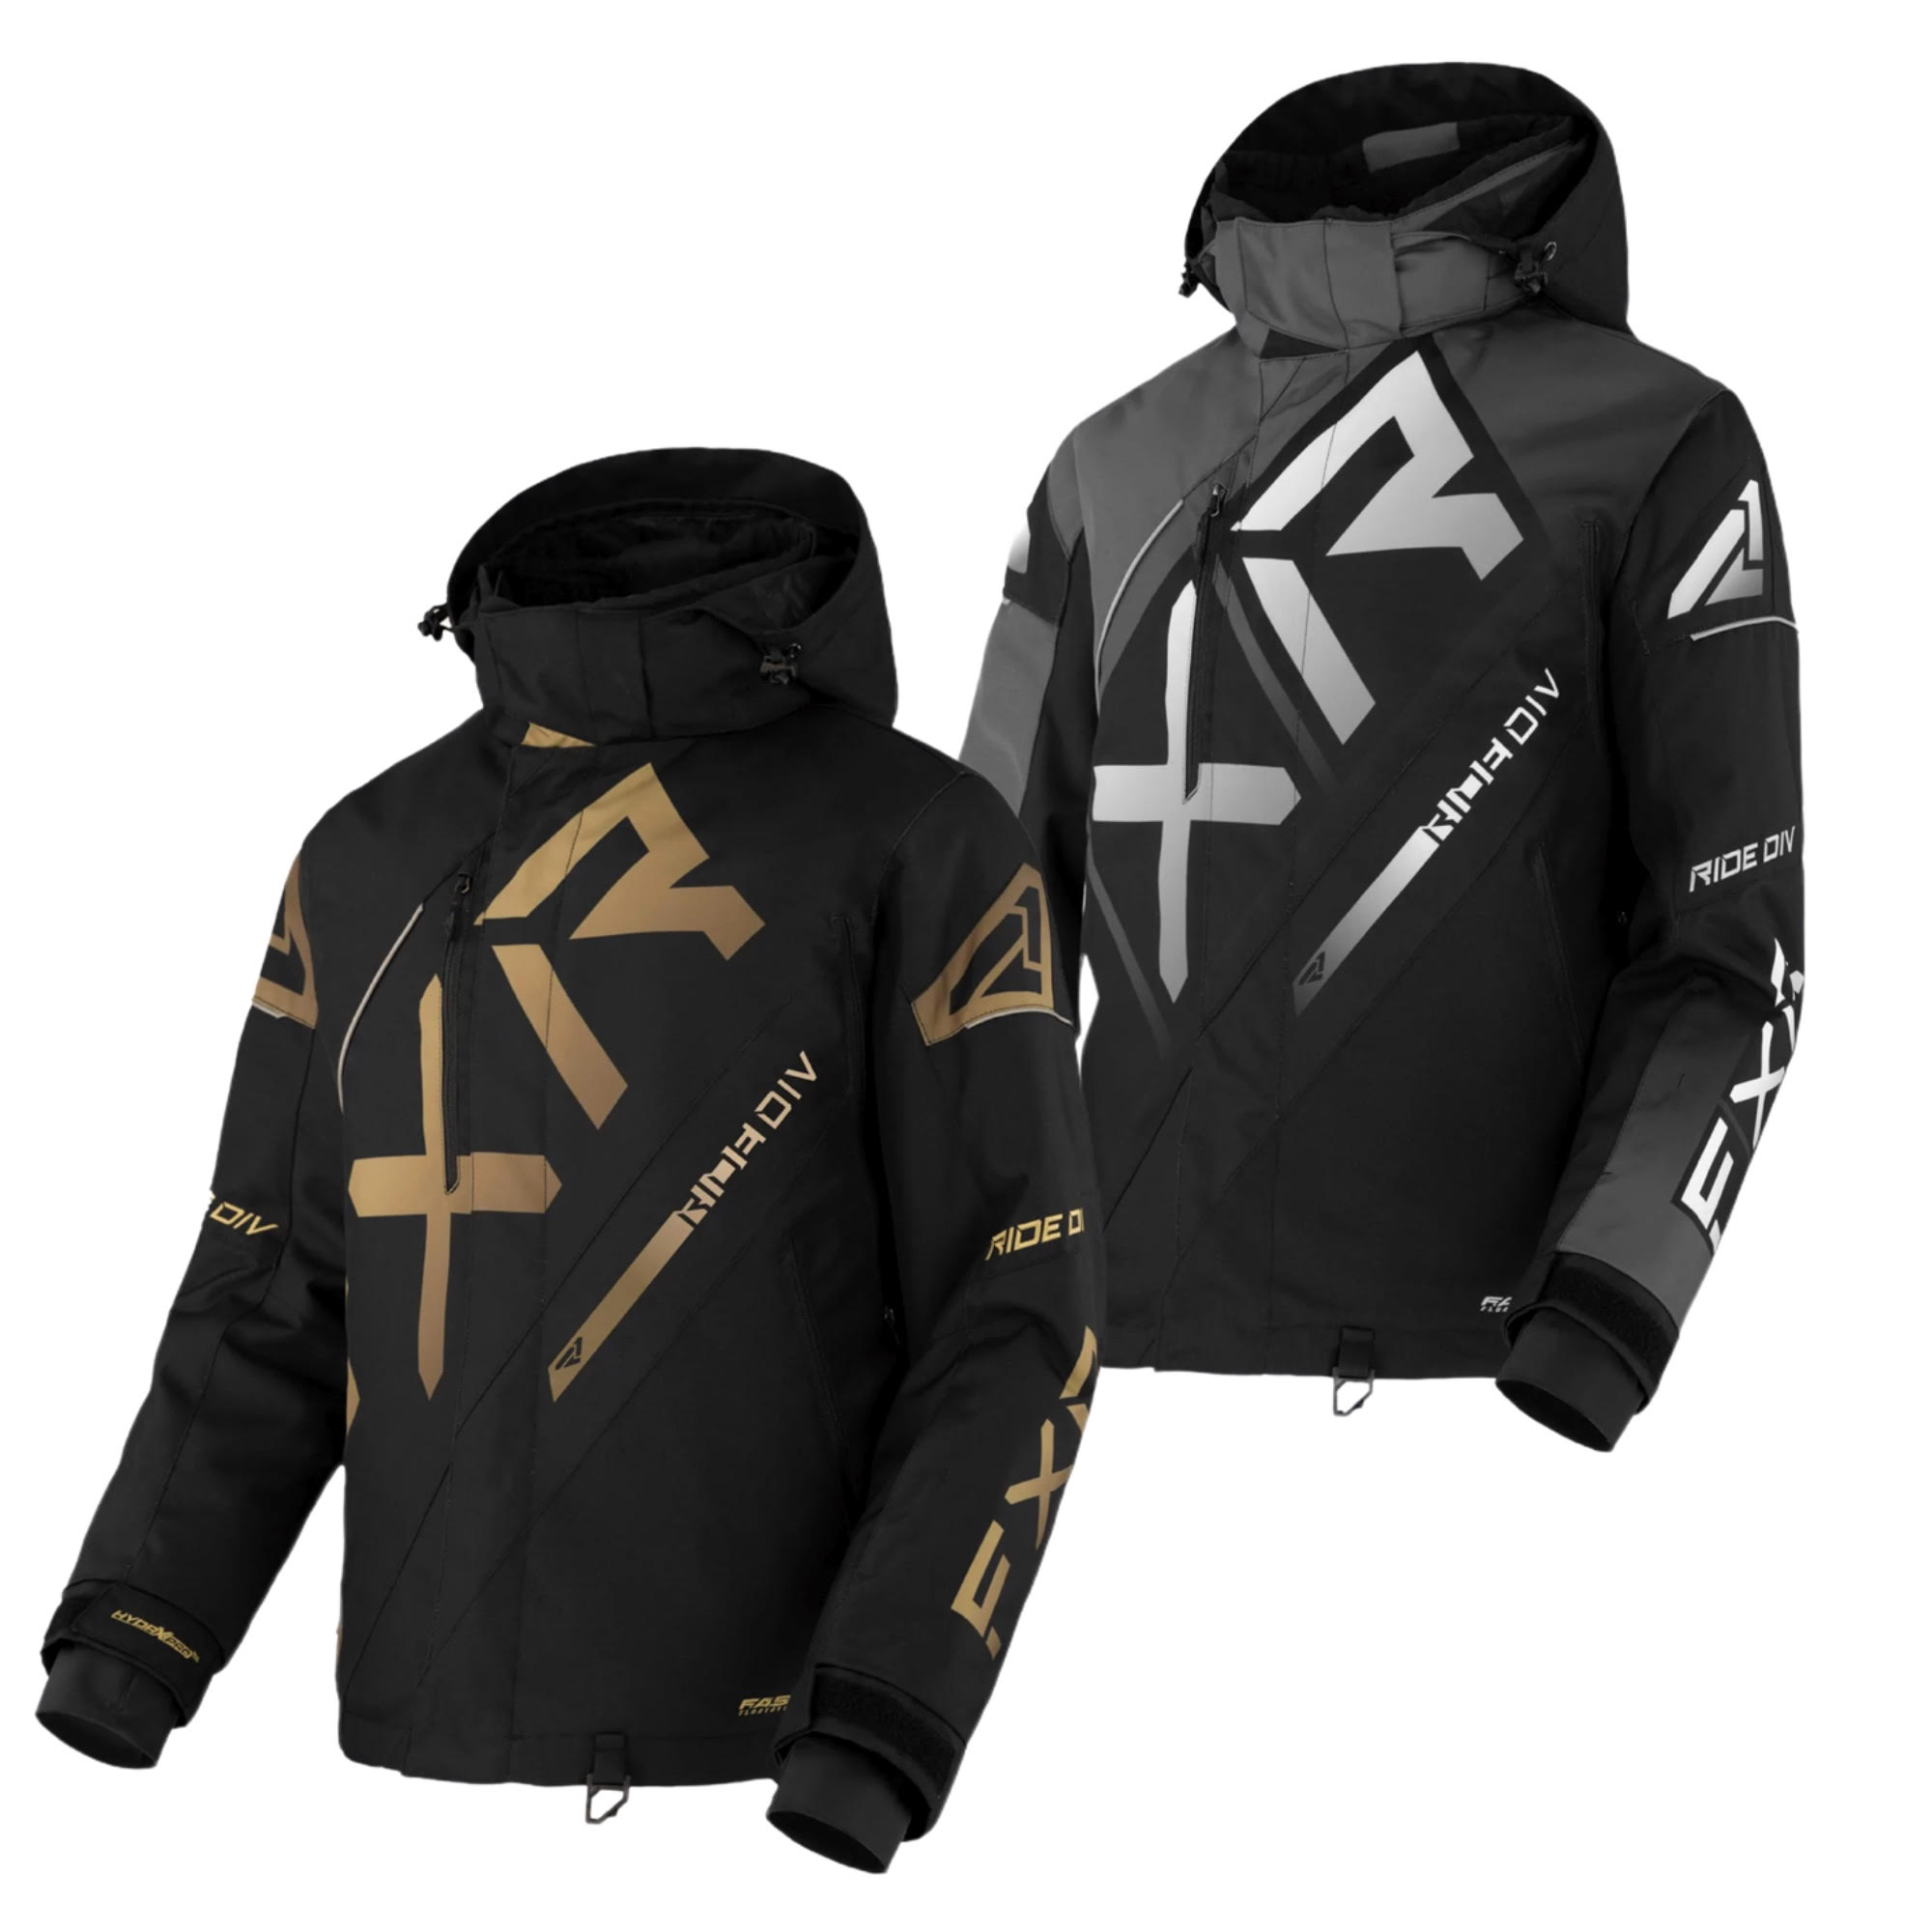 FXR MEN'S CX JACKET cover image with both colors